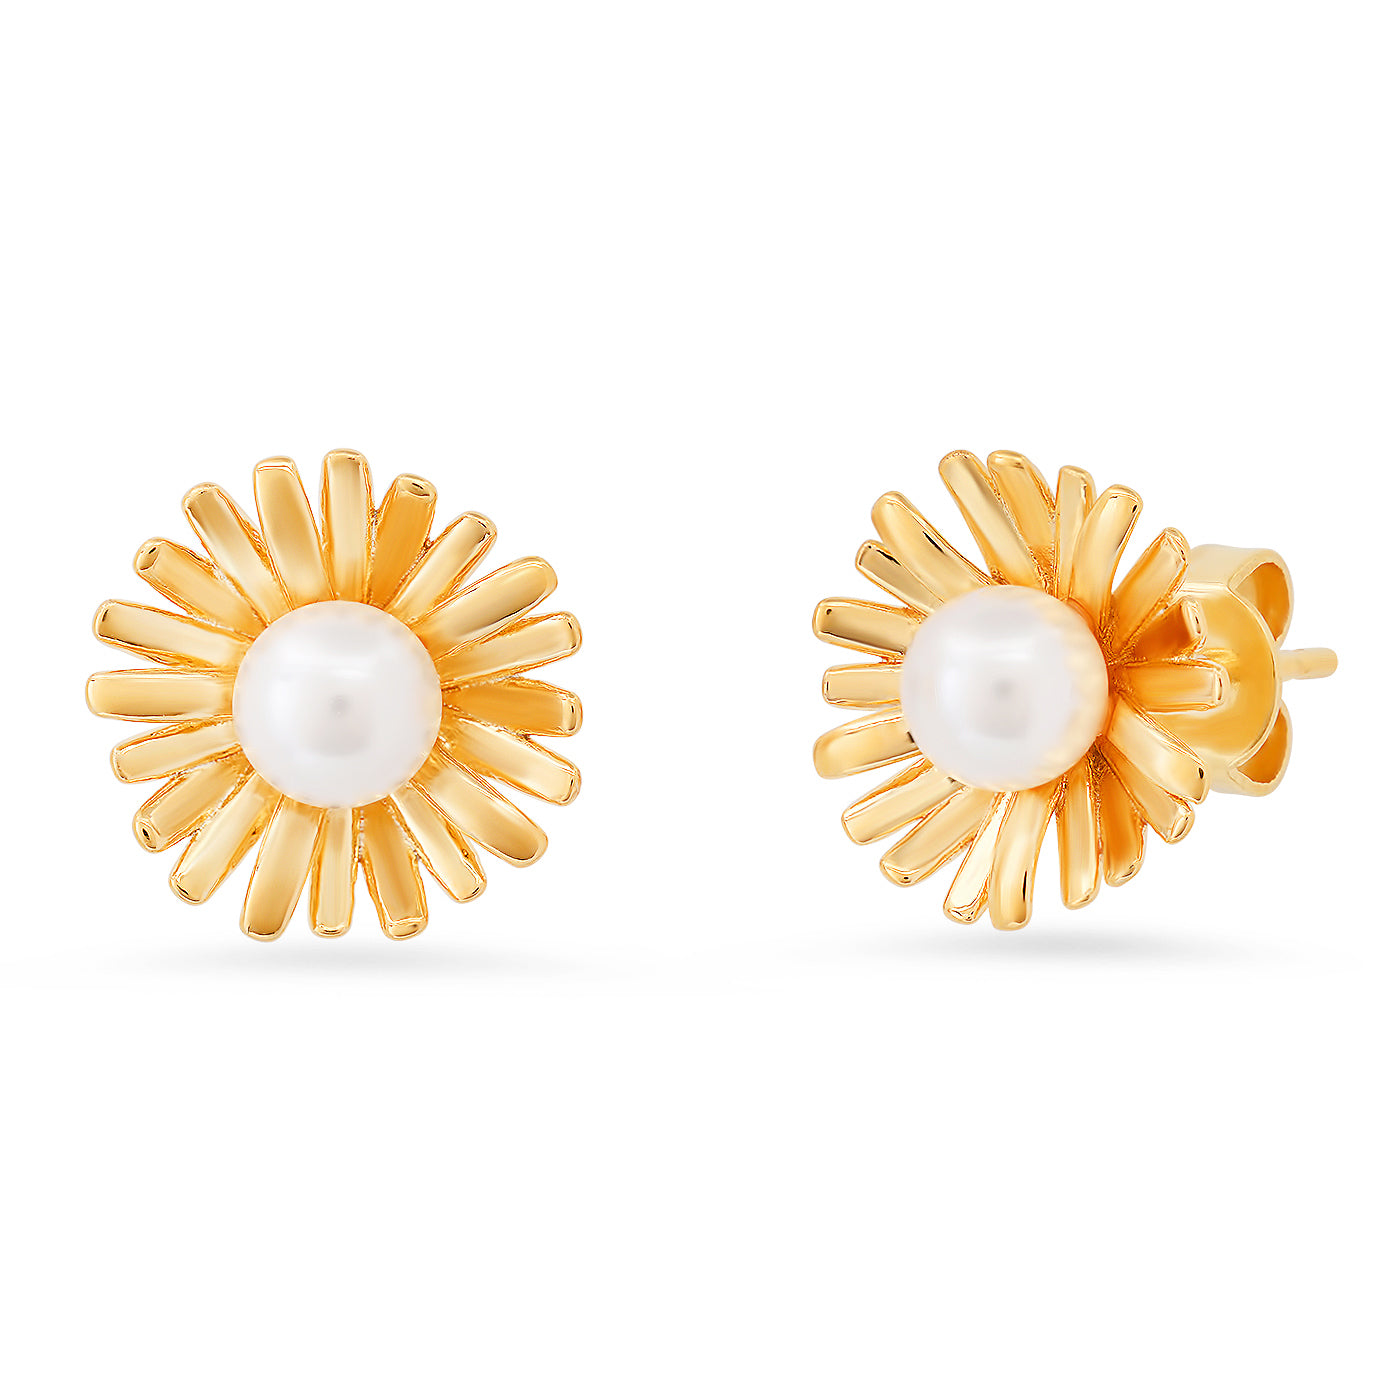 Gold Vermeil Daisy Studs with Pearl Center